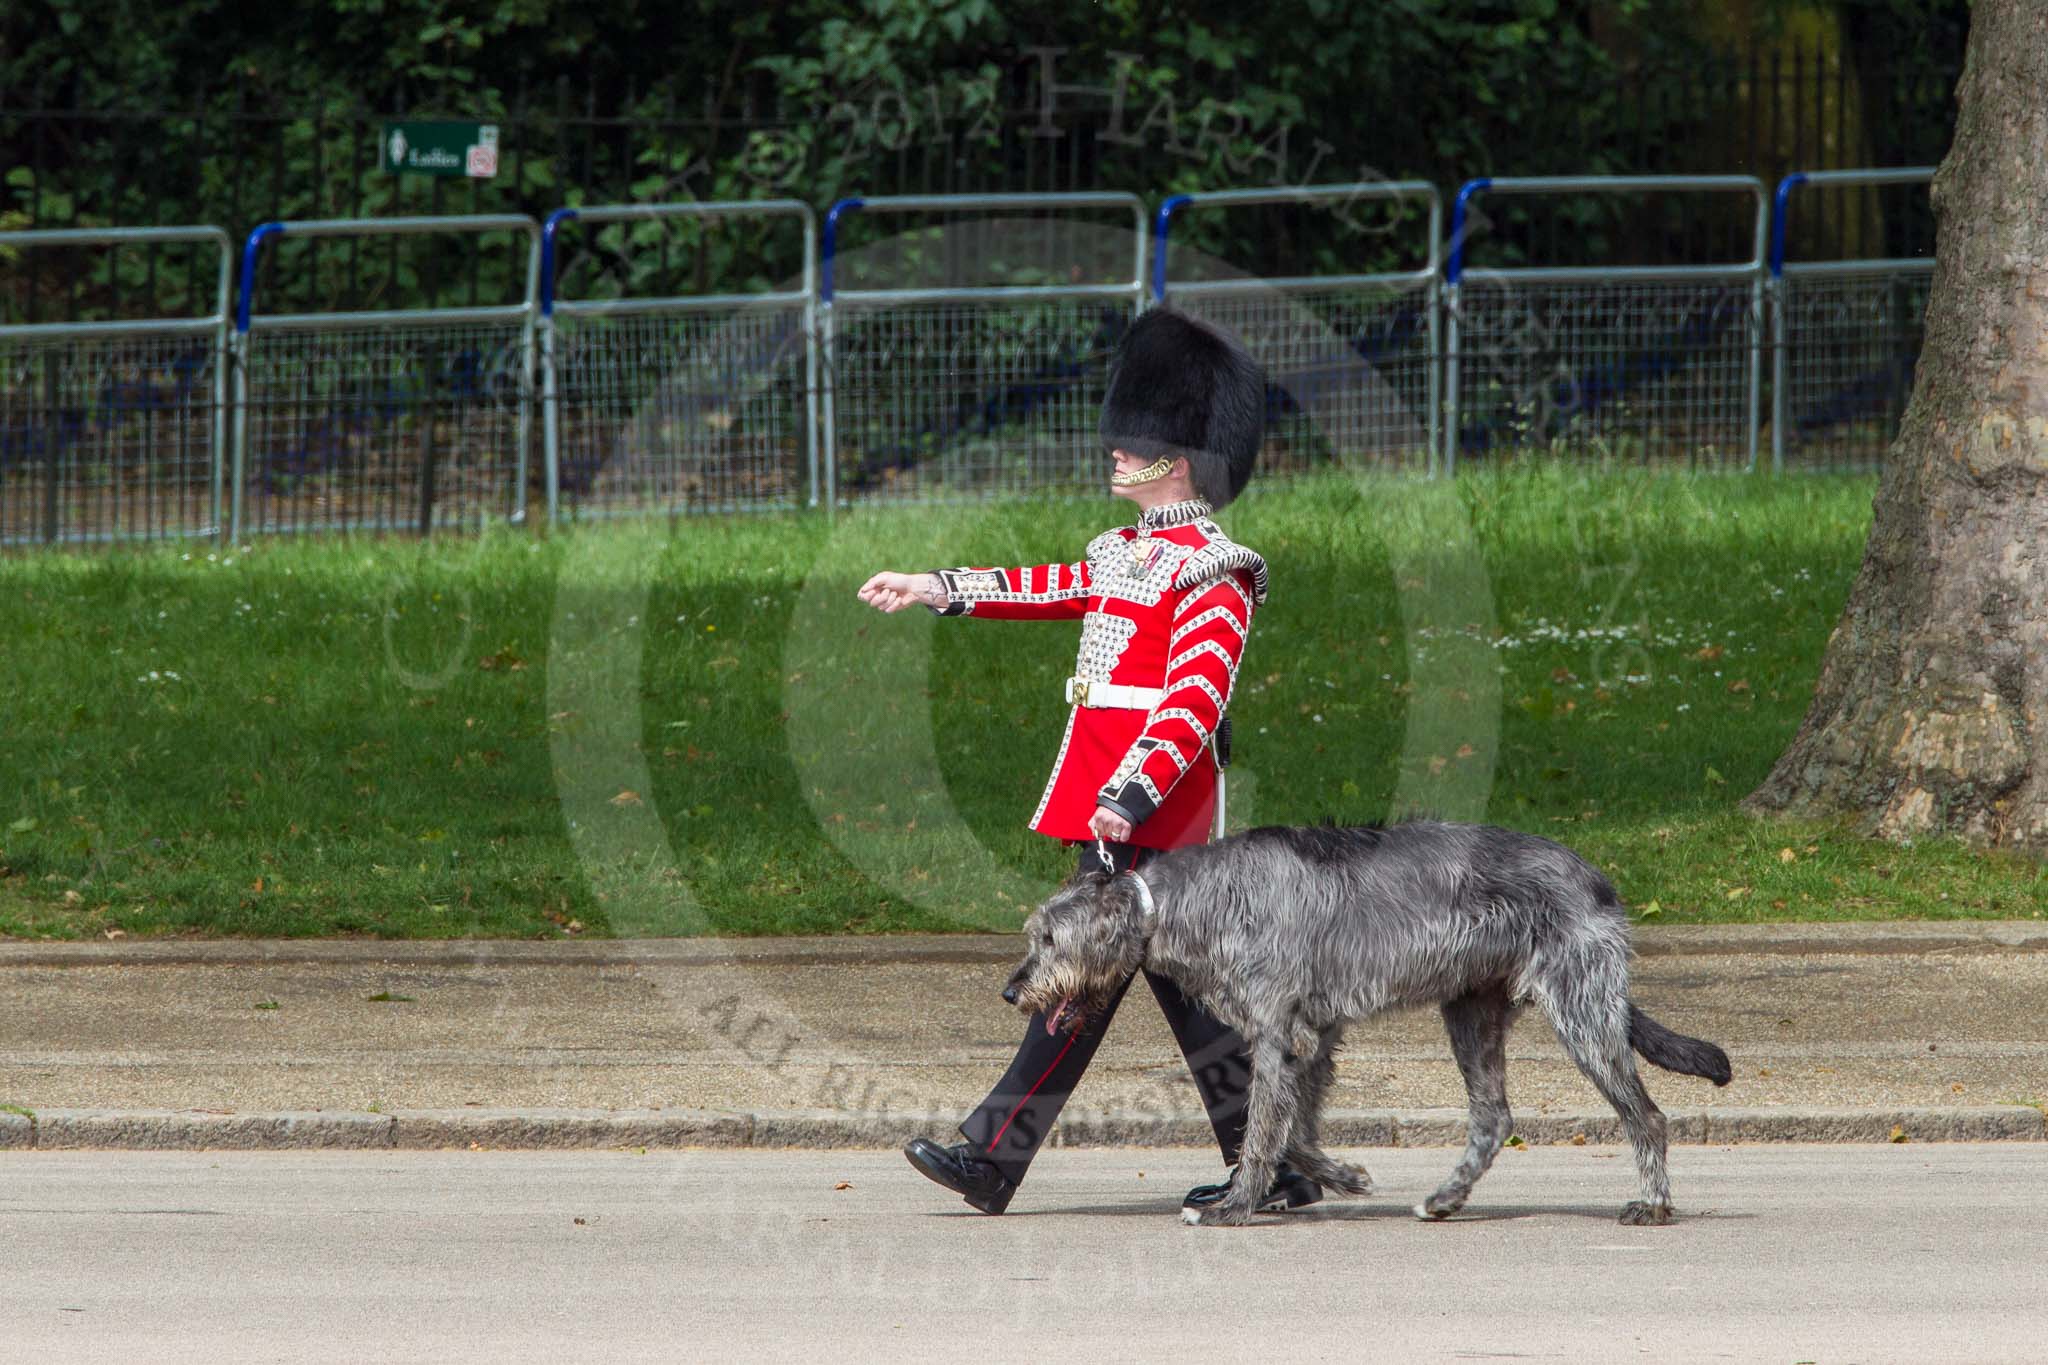 The Colonel's Review 2012: Conmael, an Irish Wolfhound, and mascot of the Irish Guards, with his handler marching along St. James's Park, on the Northern side of Horse Guards Parade..
Horse Guards Parade, Westminster,
London SW1,

United Kingdom,
on 09 June 2012 at 10:22, image #43